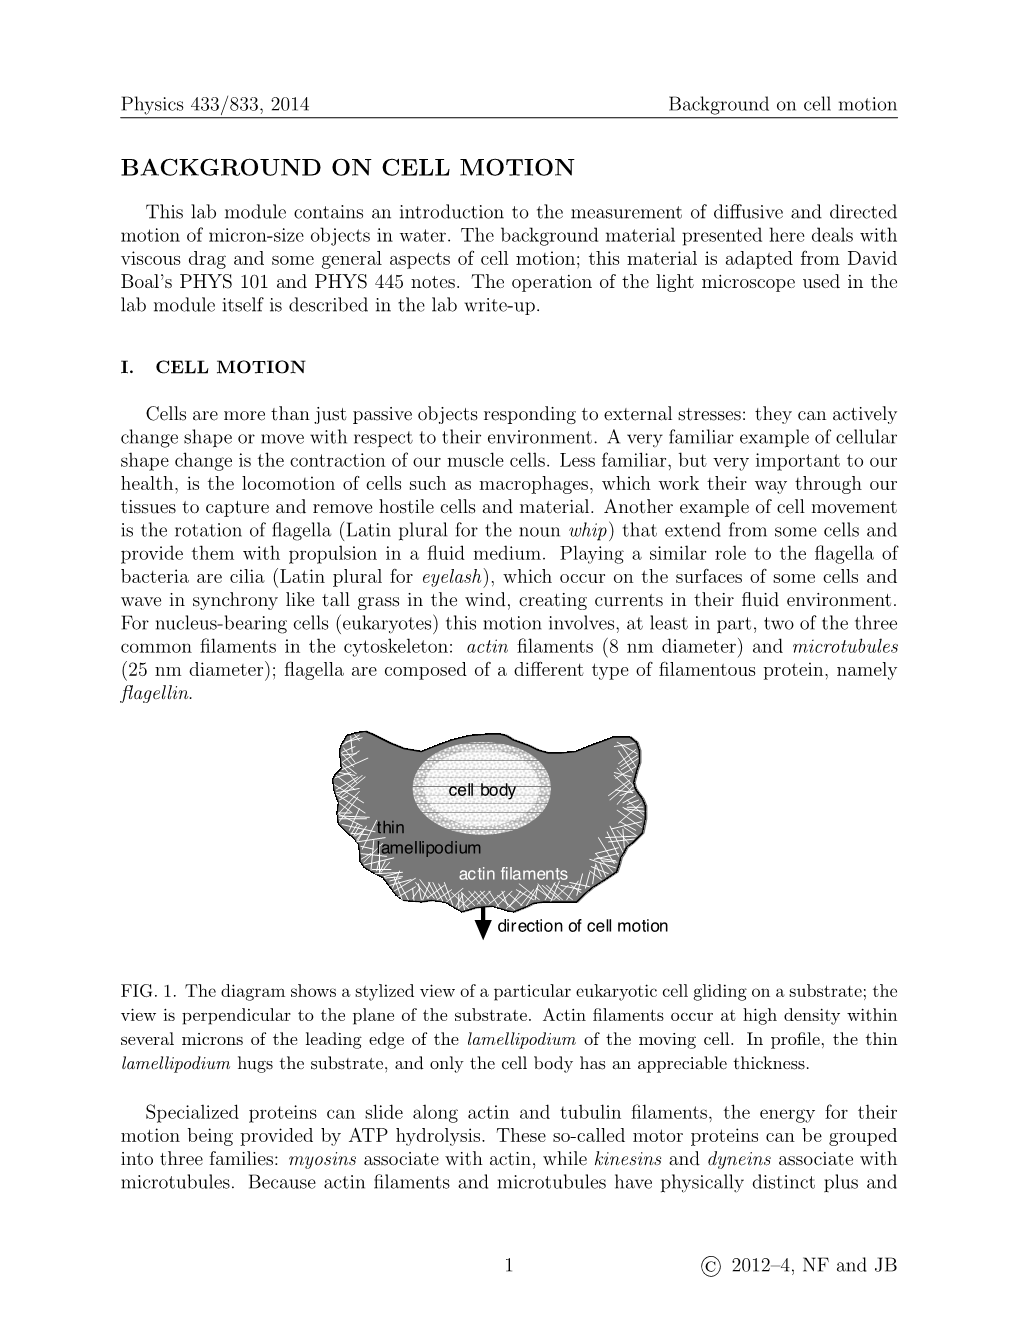 Background on Cell Motion